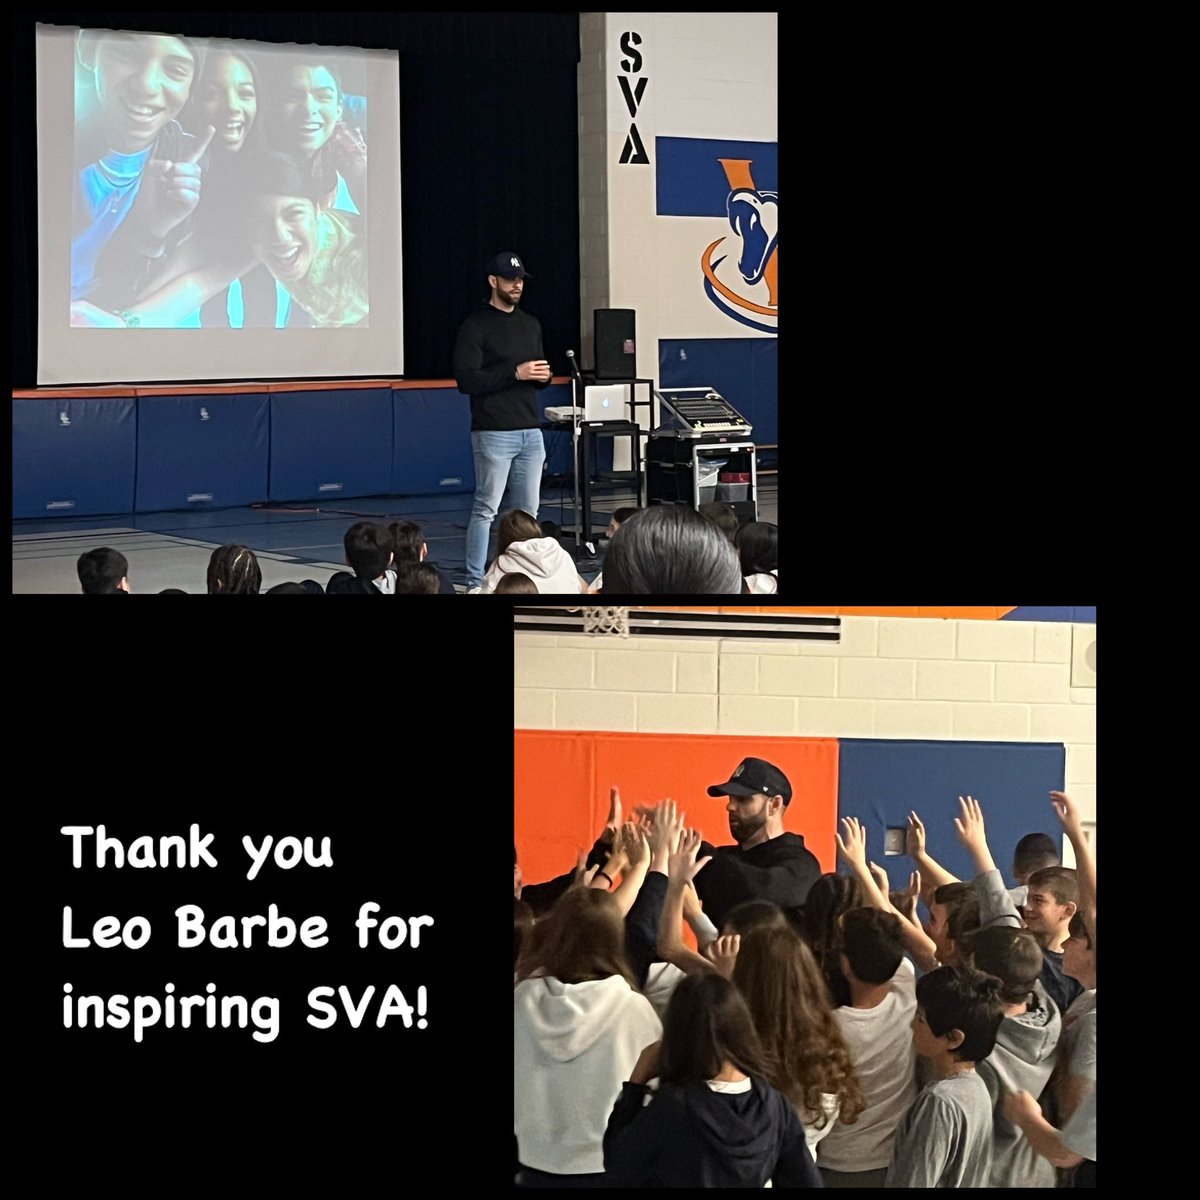 Today our Gr 5-8 students had the opportunity to listen to Leo Barbe’s motivational messaging. Thank you Leo for helping us believe in ourselves! @YCDSB_MH @WigstonJennifer